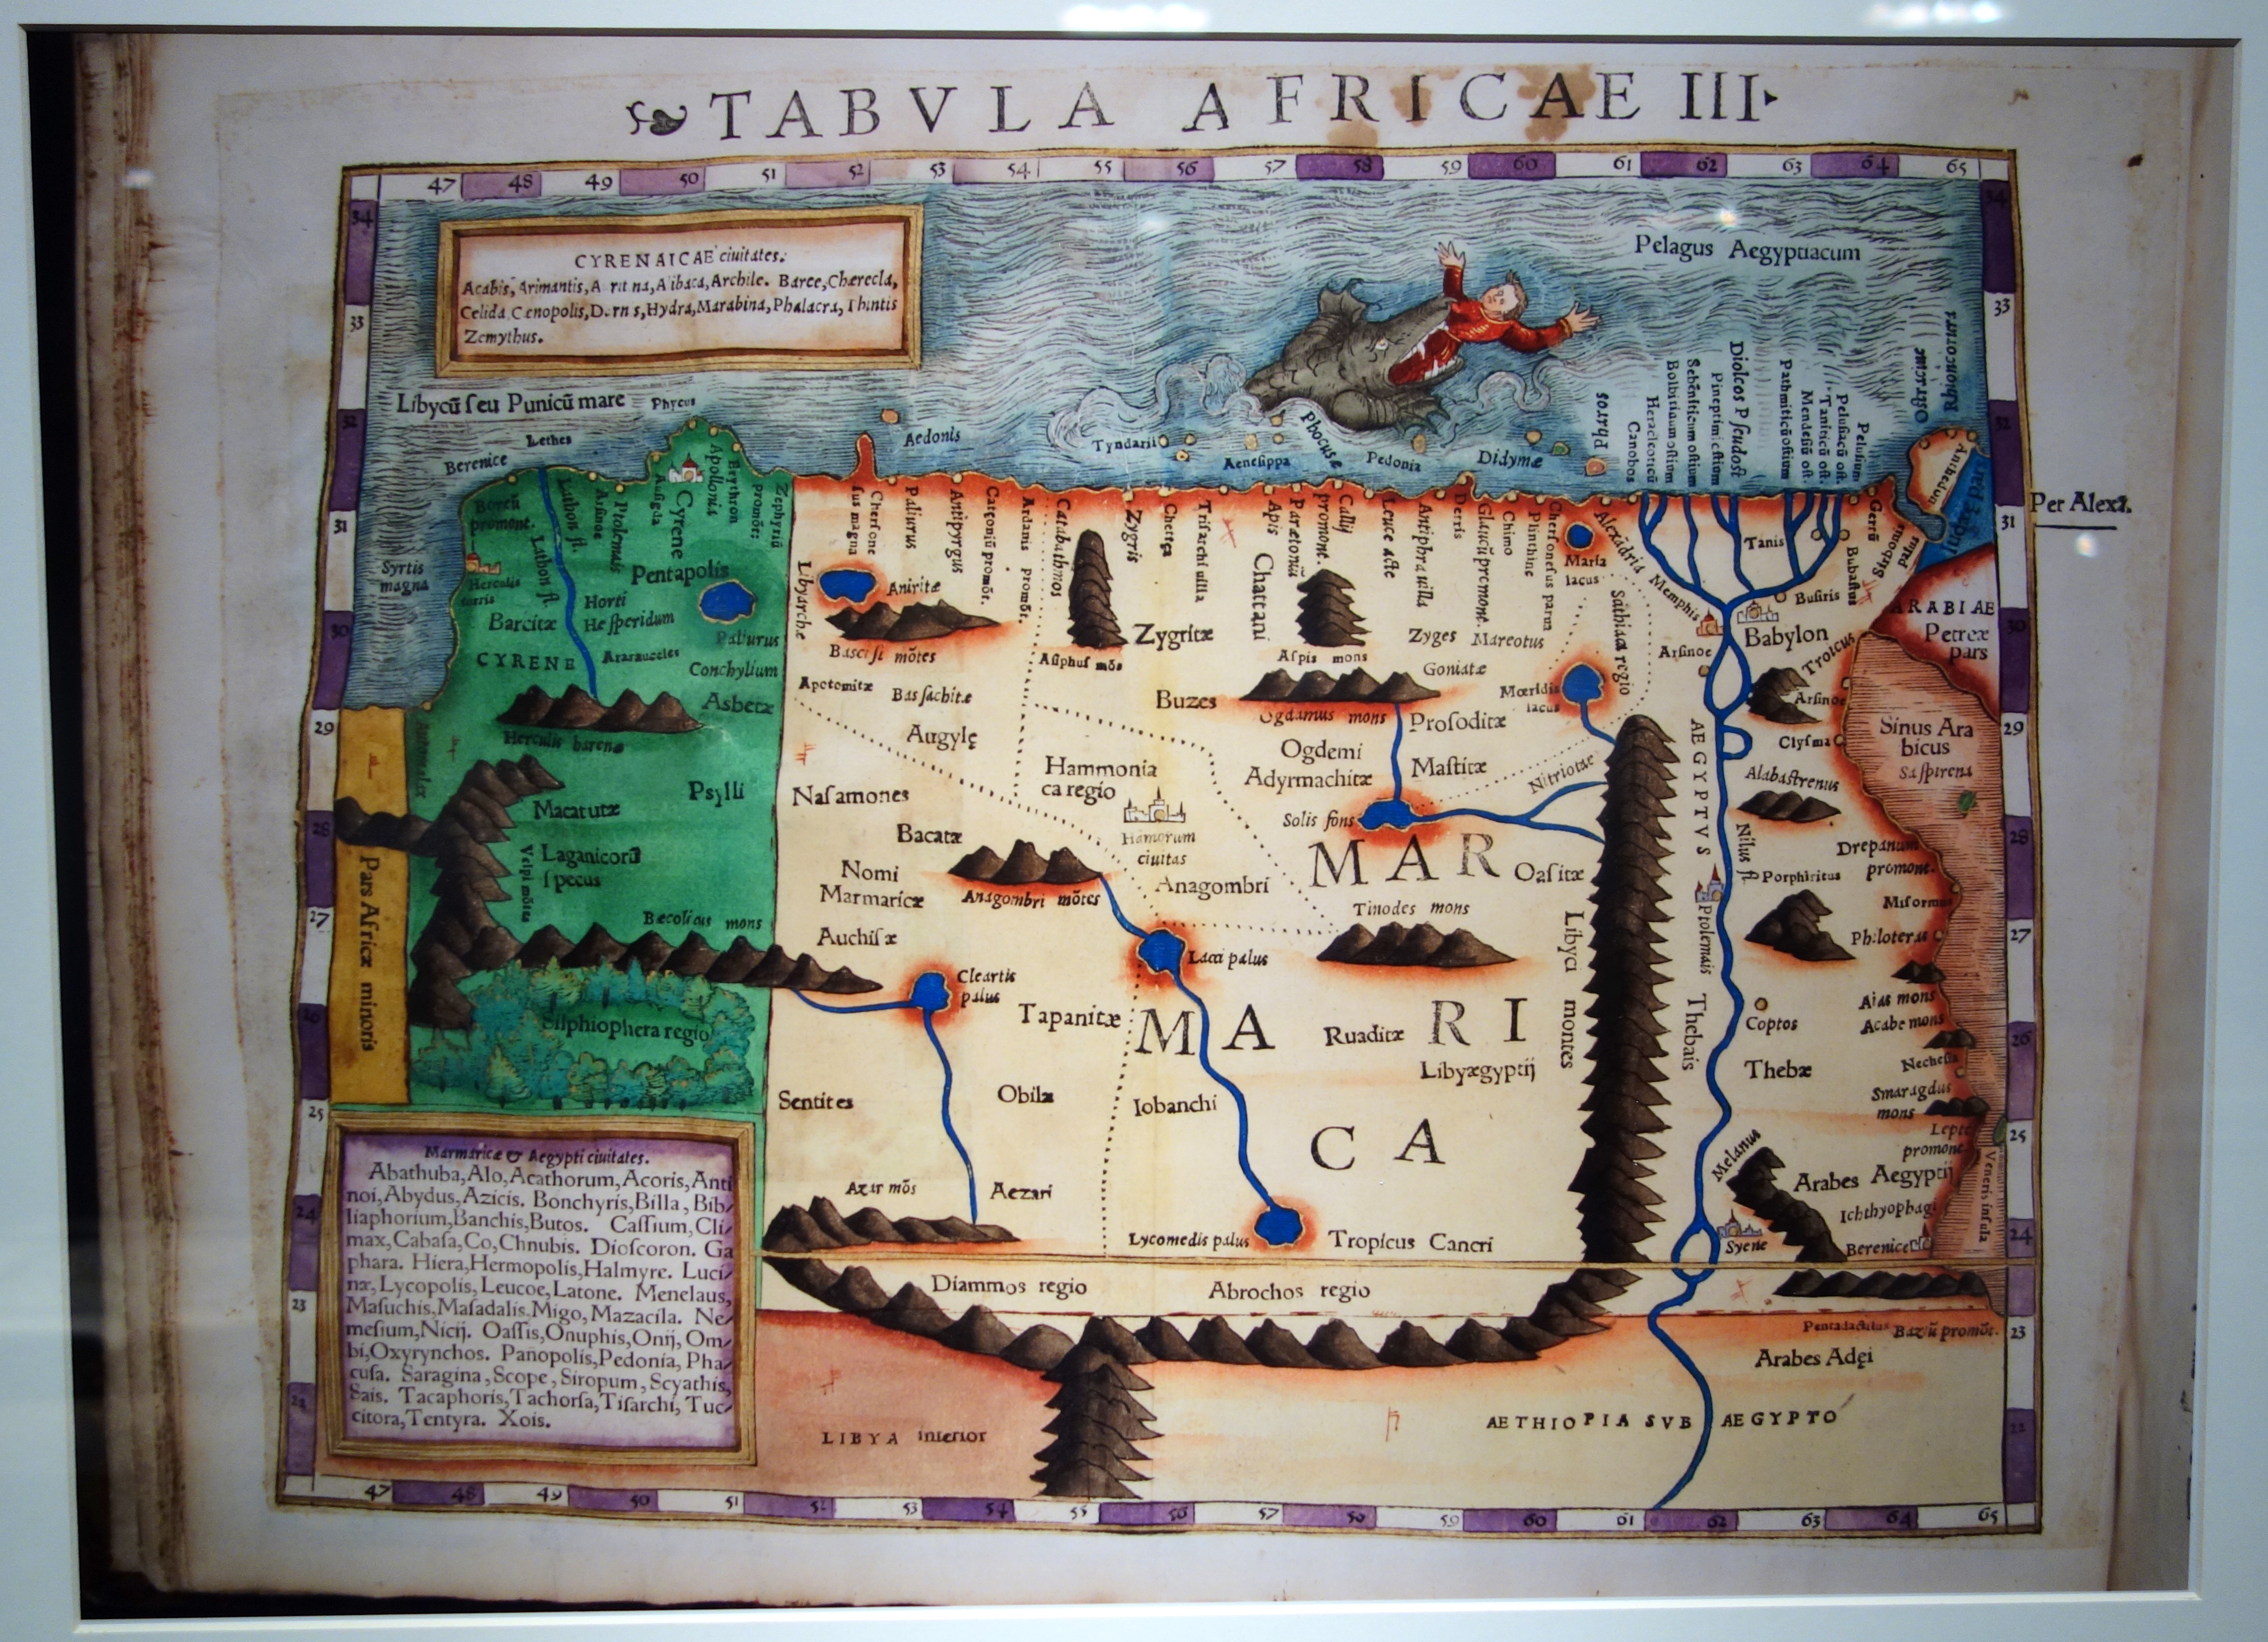 Geographia by Ptolemy, Aphricae Tabula III, 1540 Basel edition - Maps of Africa - Robert C. Williams Paper Museum - DSC00625